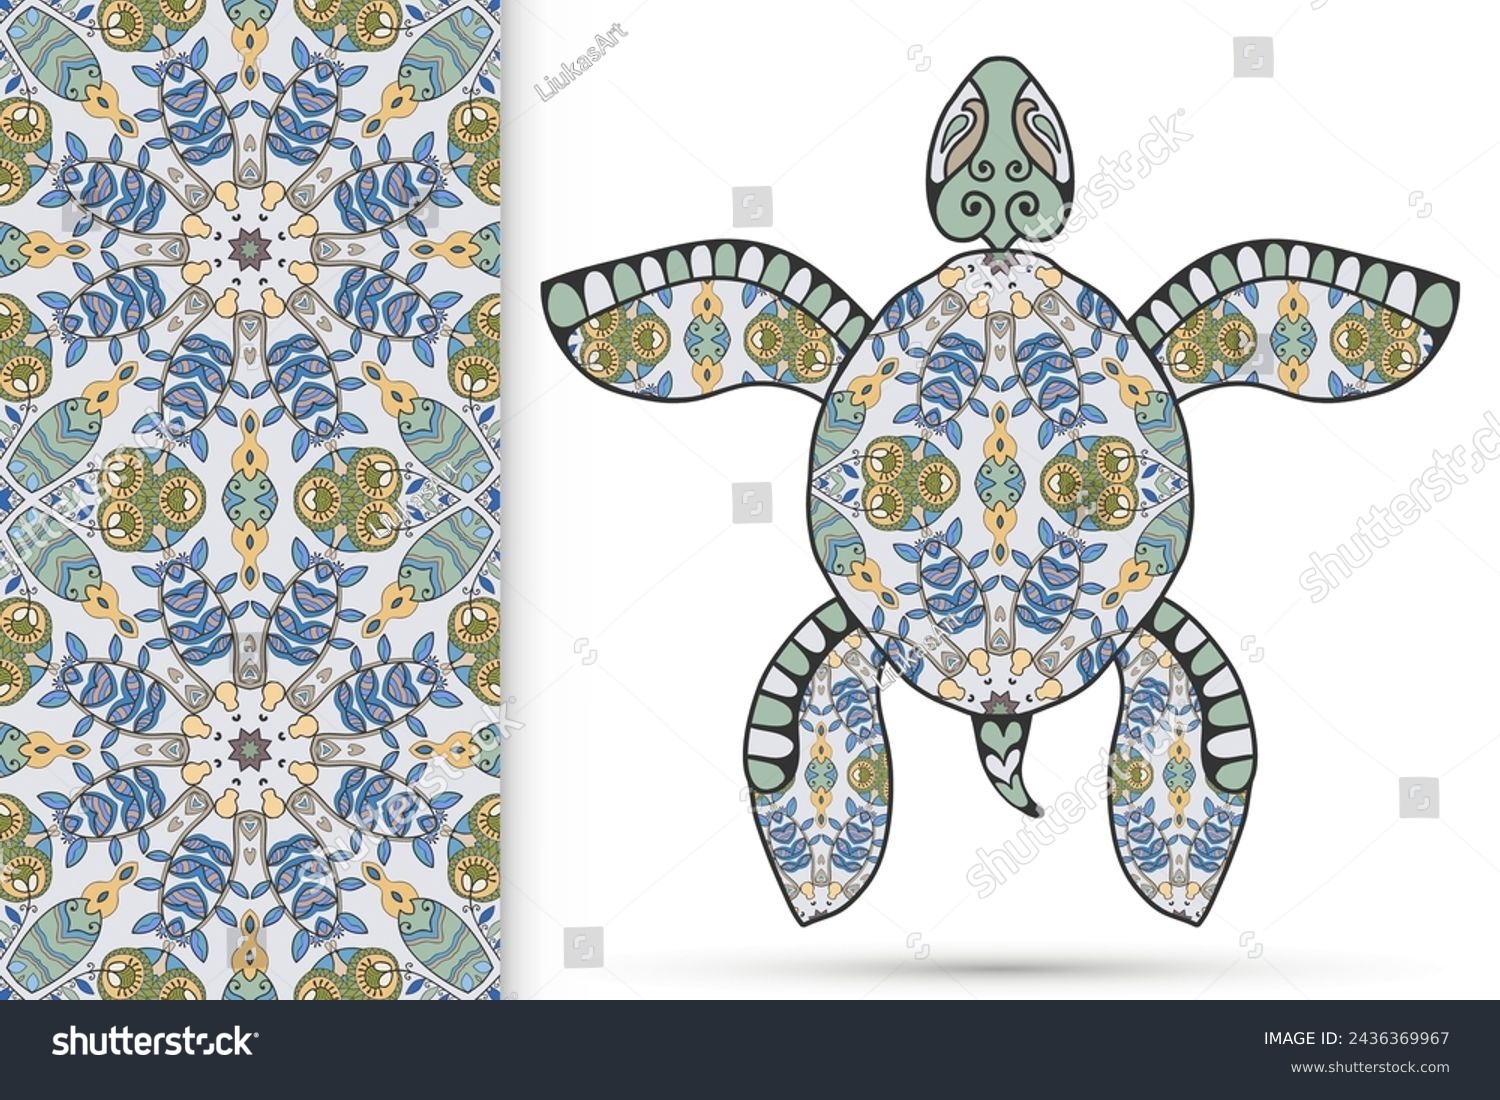 SVG of Decorative doodle turtle with ornament and colorful seamless hand drawn pattern. Tribal totem animal, isolated element for scrapbook, invitation card, book cover design, textile fabric print svg